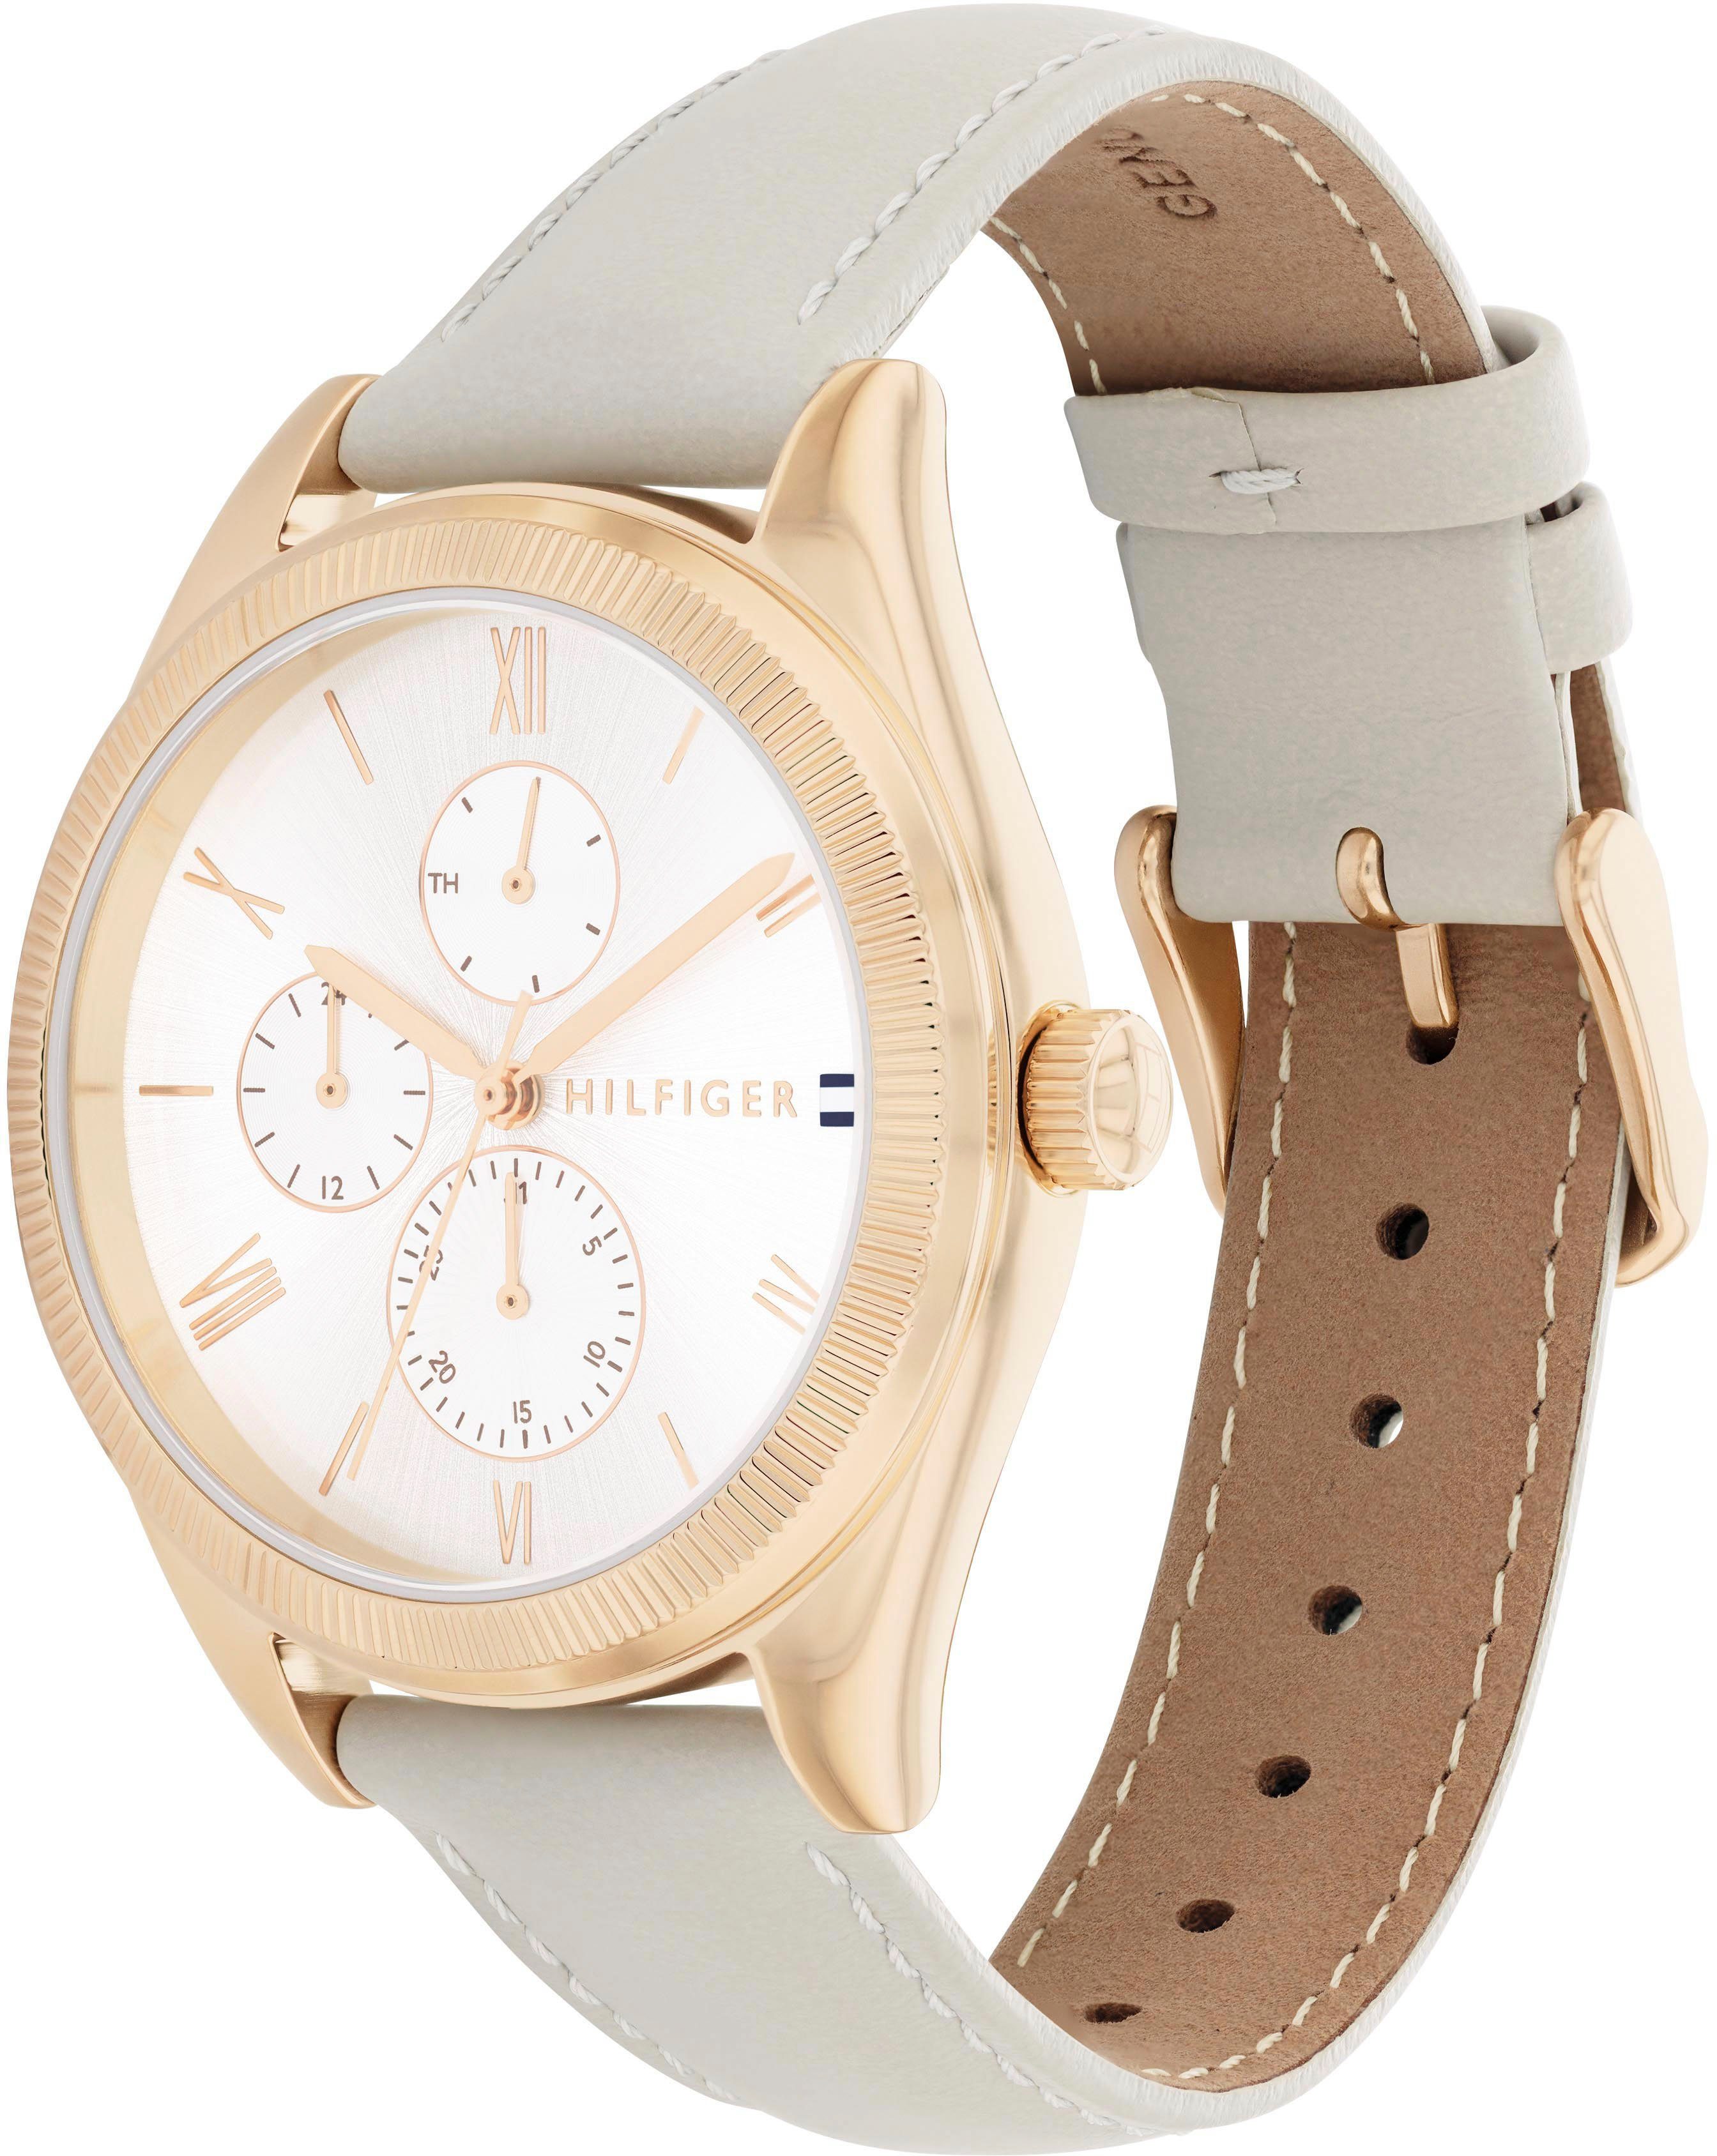 Tommy Hilfiger Multifunktionsuhr CLASSIC, 1782595